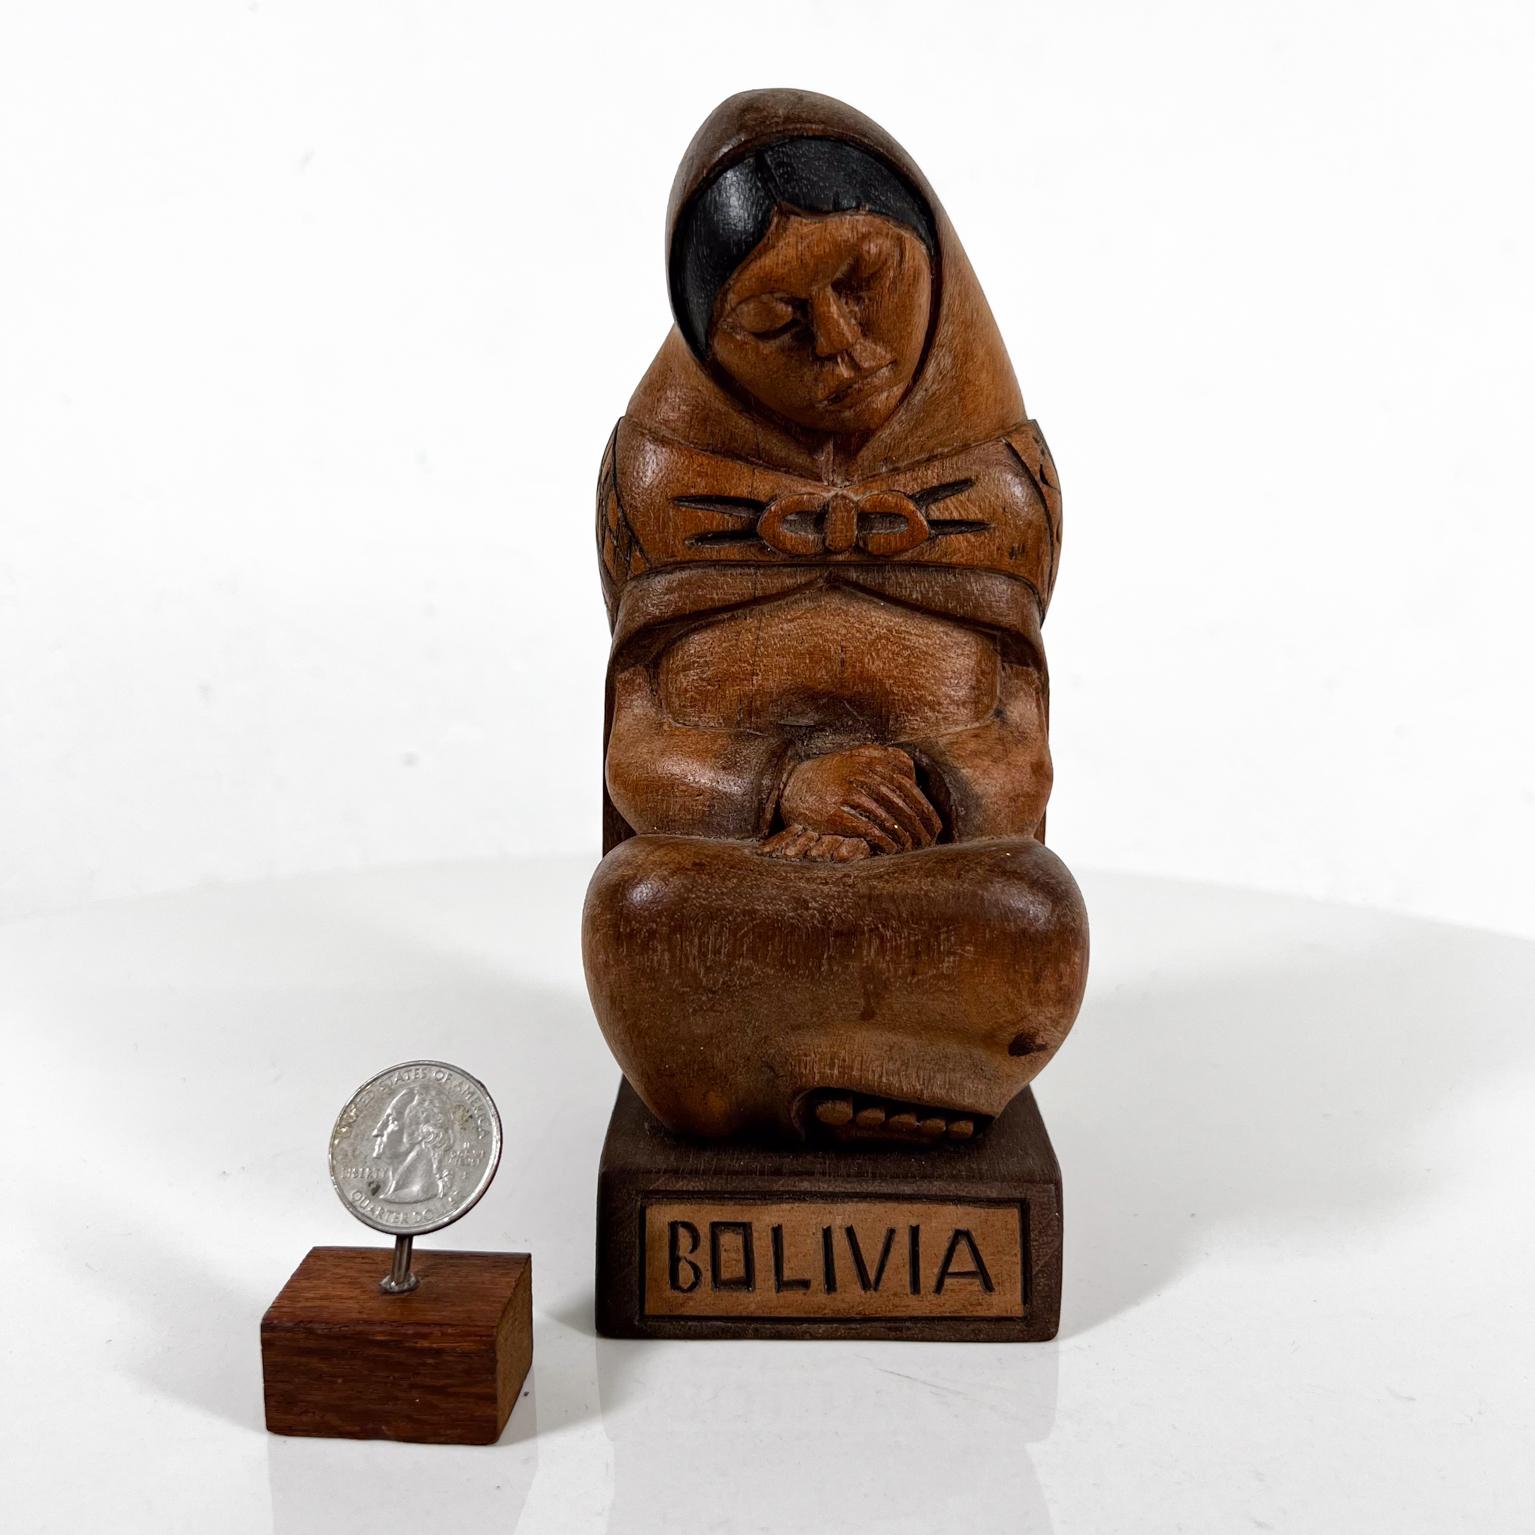 1960s Bolivia Wood Hand Carving Mother and Child
3 x 4 d x 7.13 h
Original vintage condition
See all images.